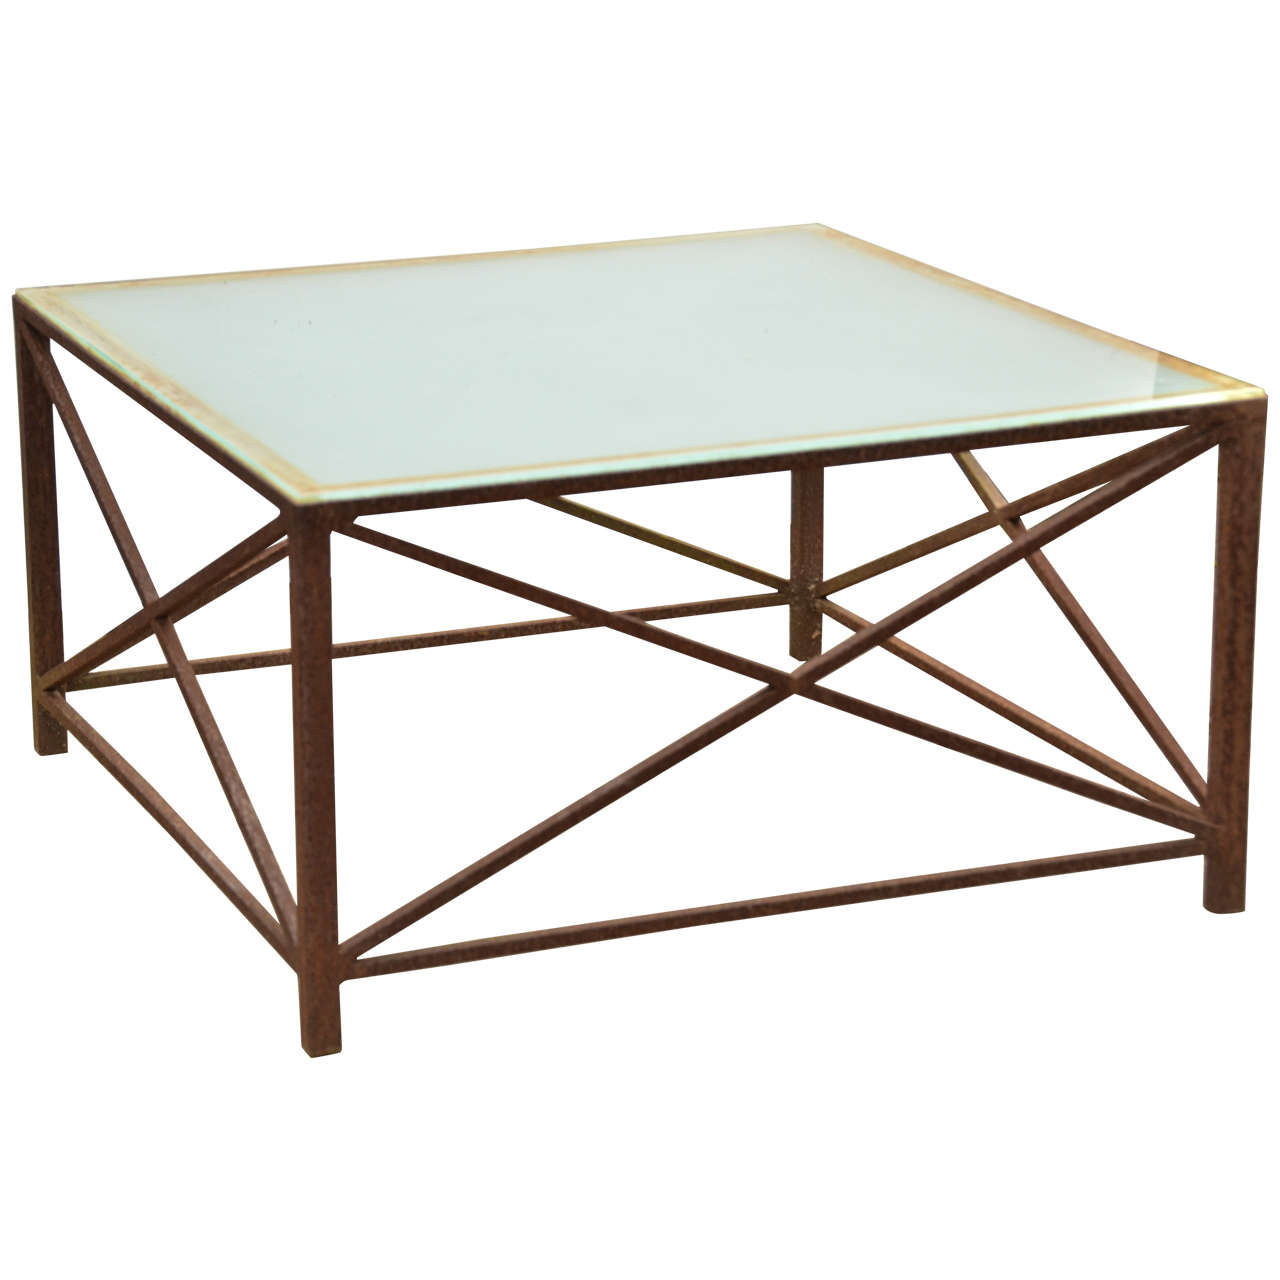 American Rusted Iron Coffee Table with "X" Braced Sides For Sale